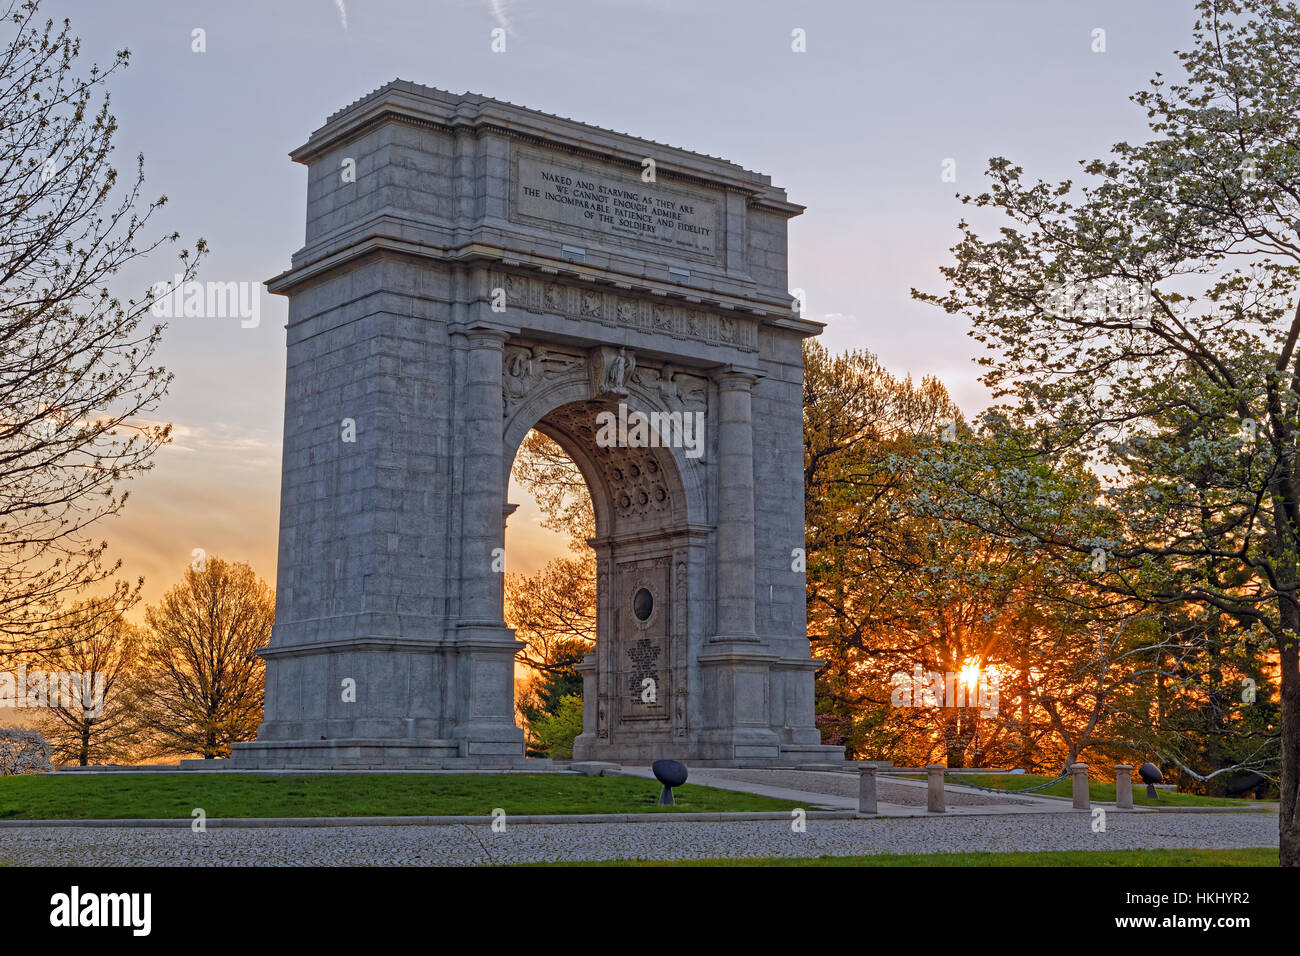 Frühling Sonnenaufgang am National Memorial Arch in Valley Forge National Historical Park, Pennsylvania, USA. Stockfoto